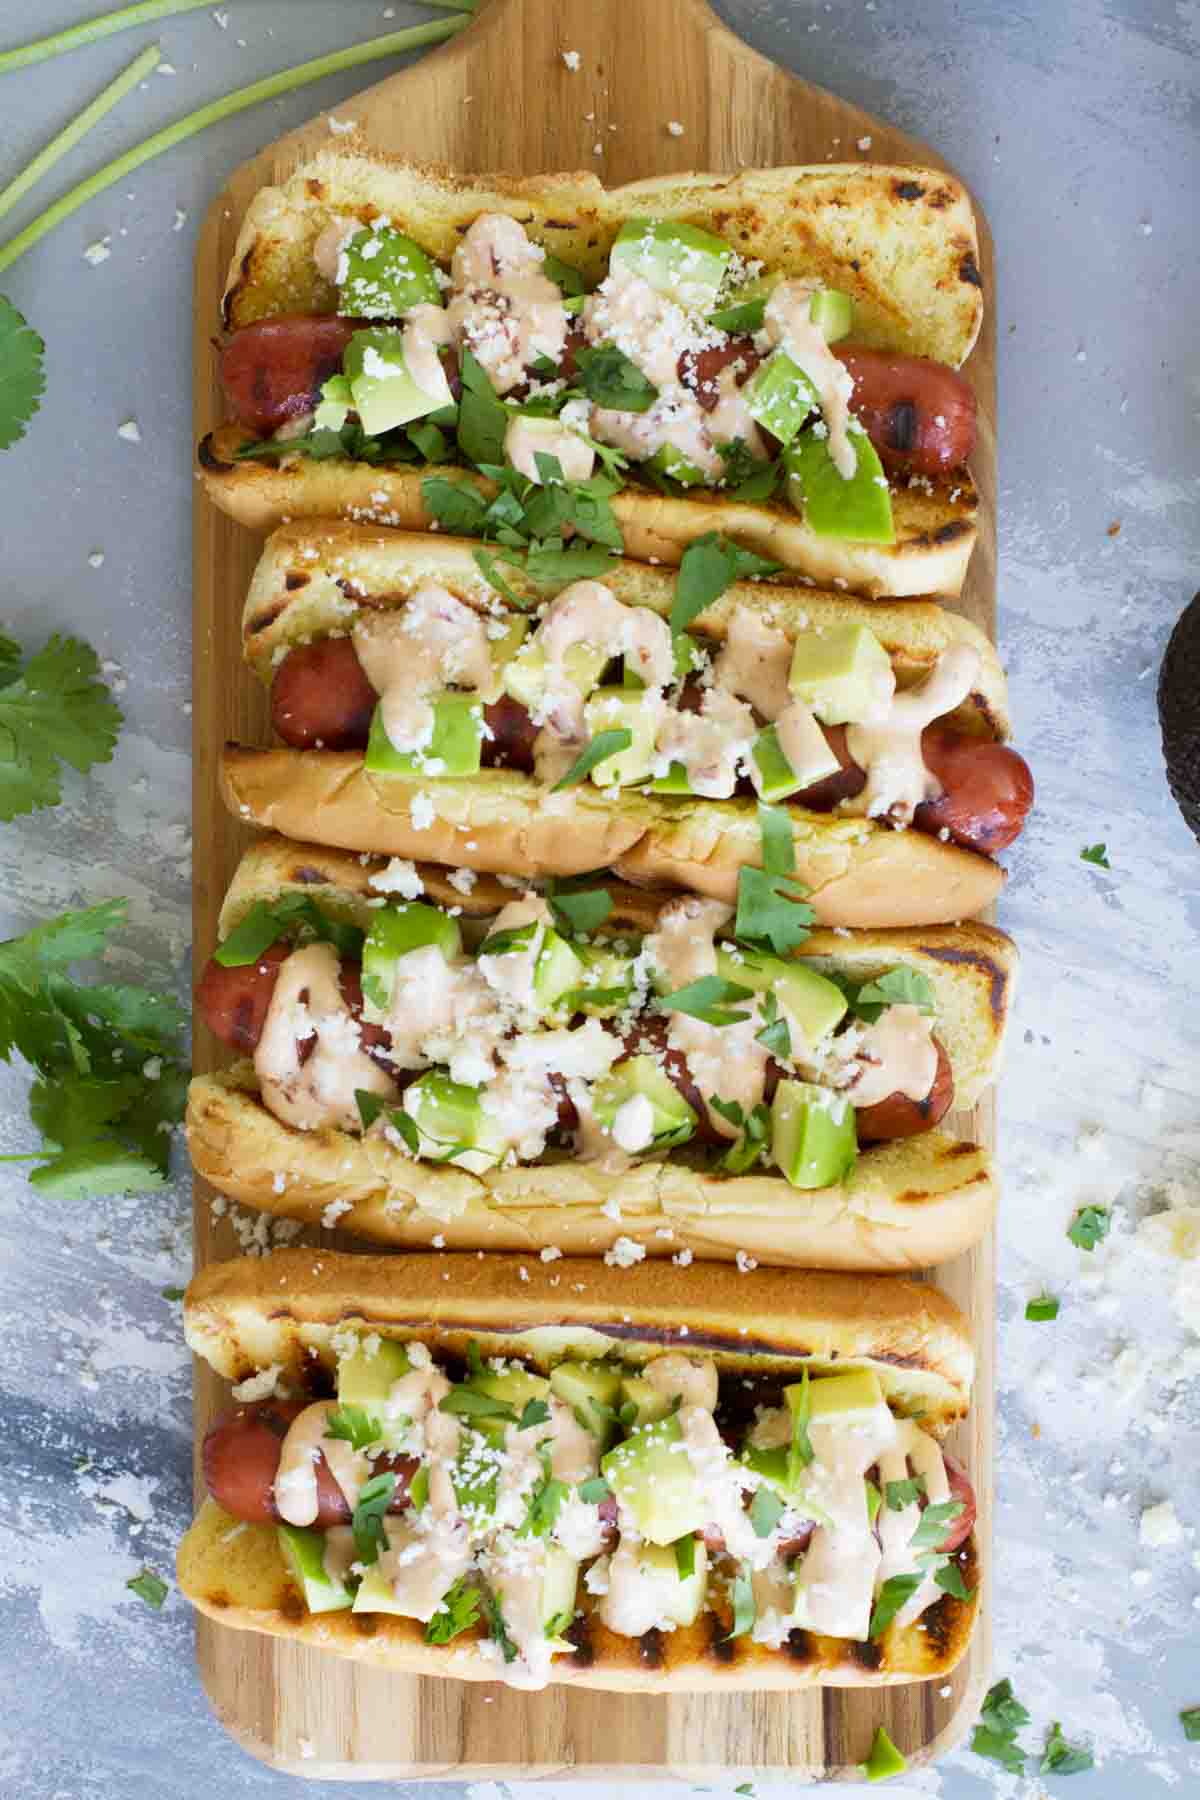 Grilled hot dogs topped with Mexican inspired toppings